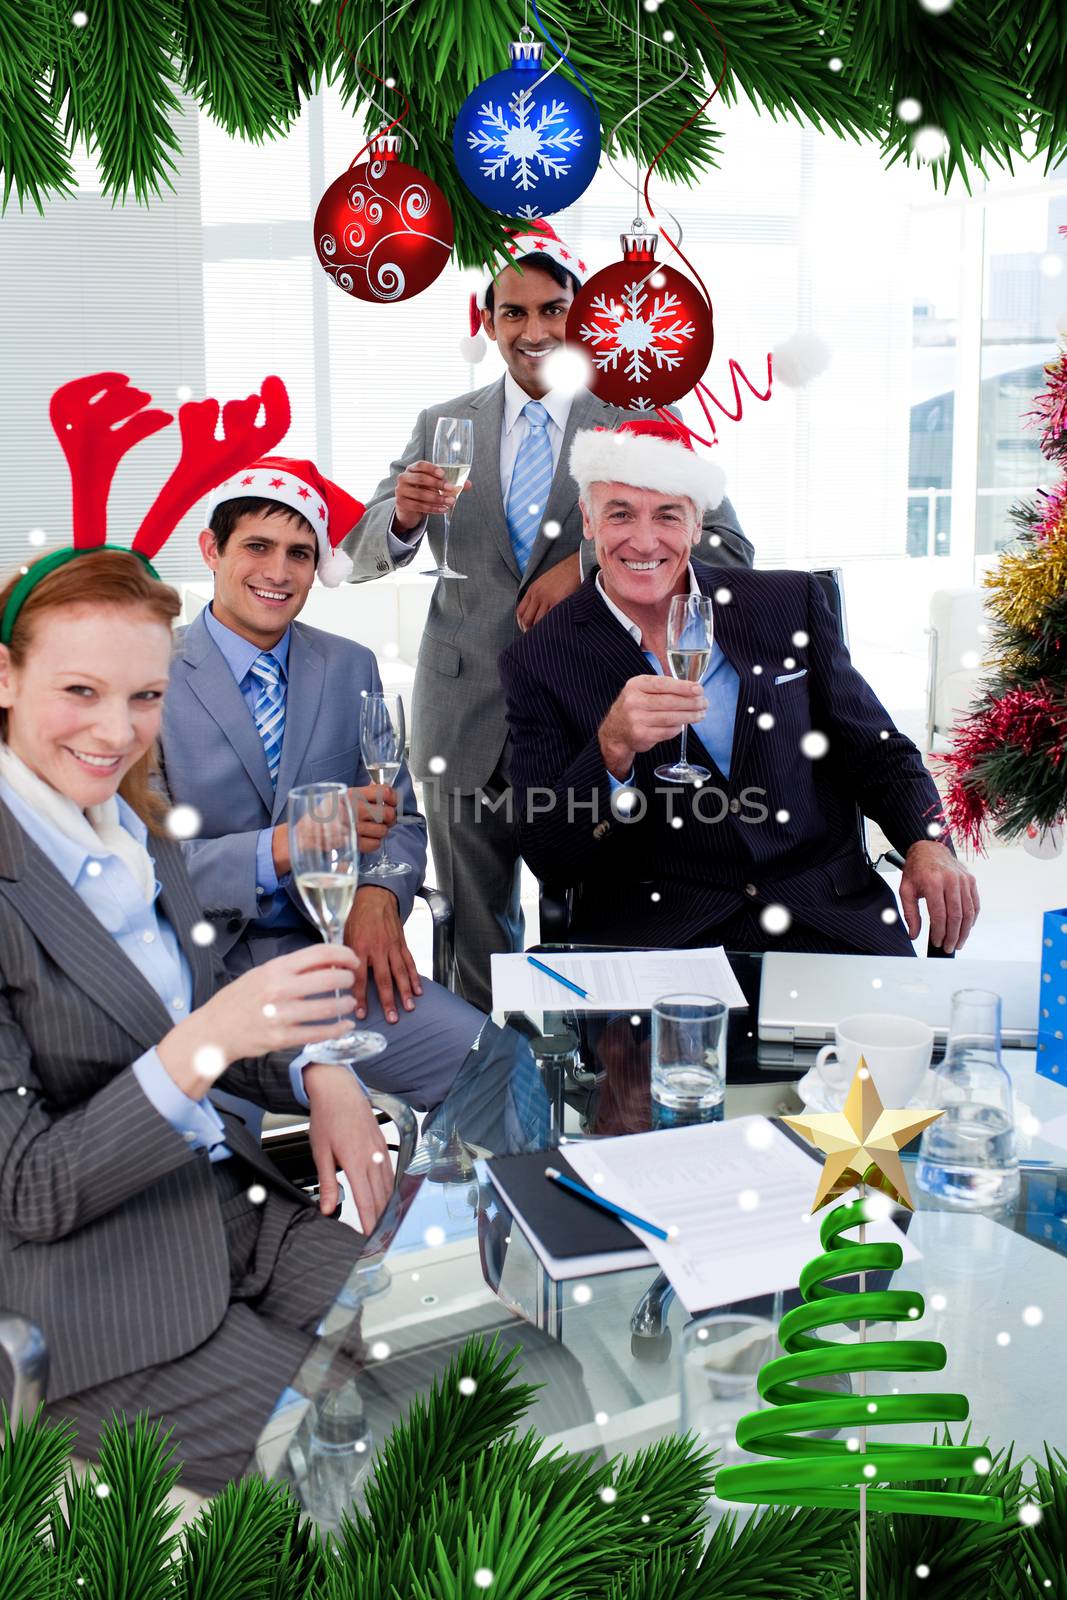 Manager and his team toasting with Champagne at a Christmas party against snow falling